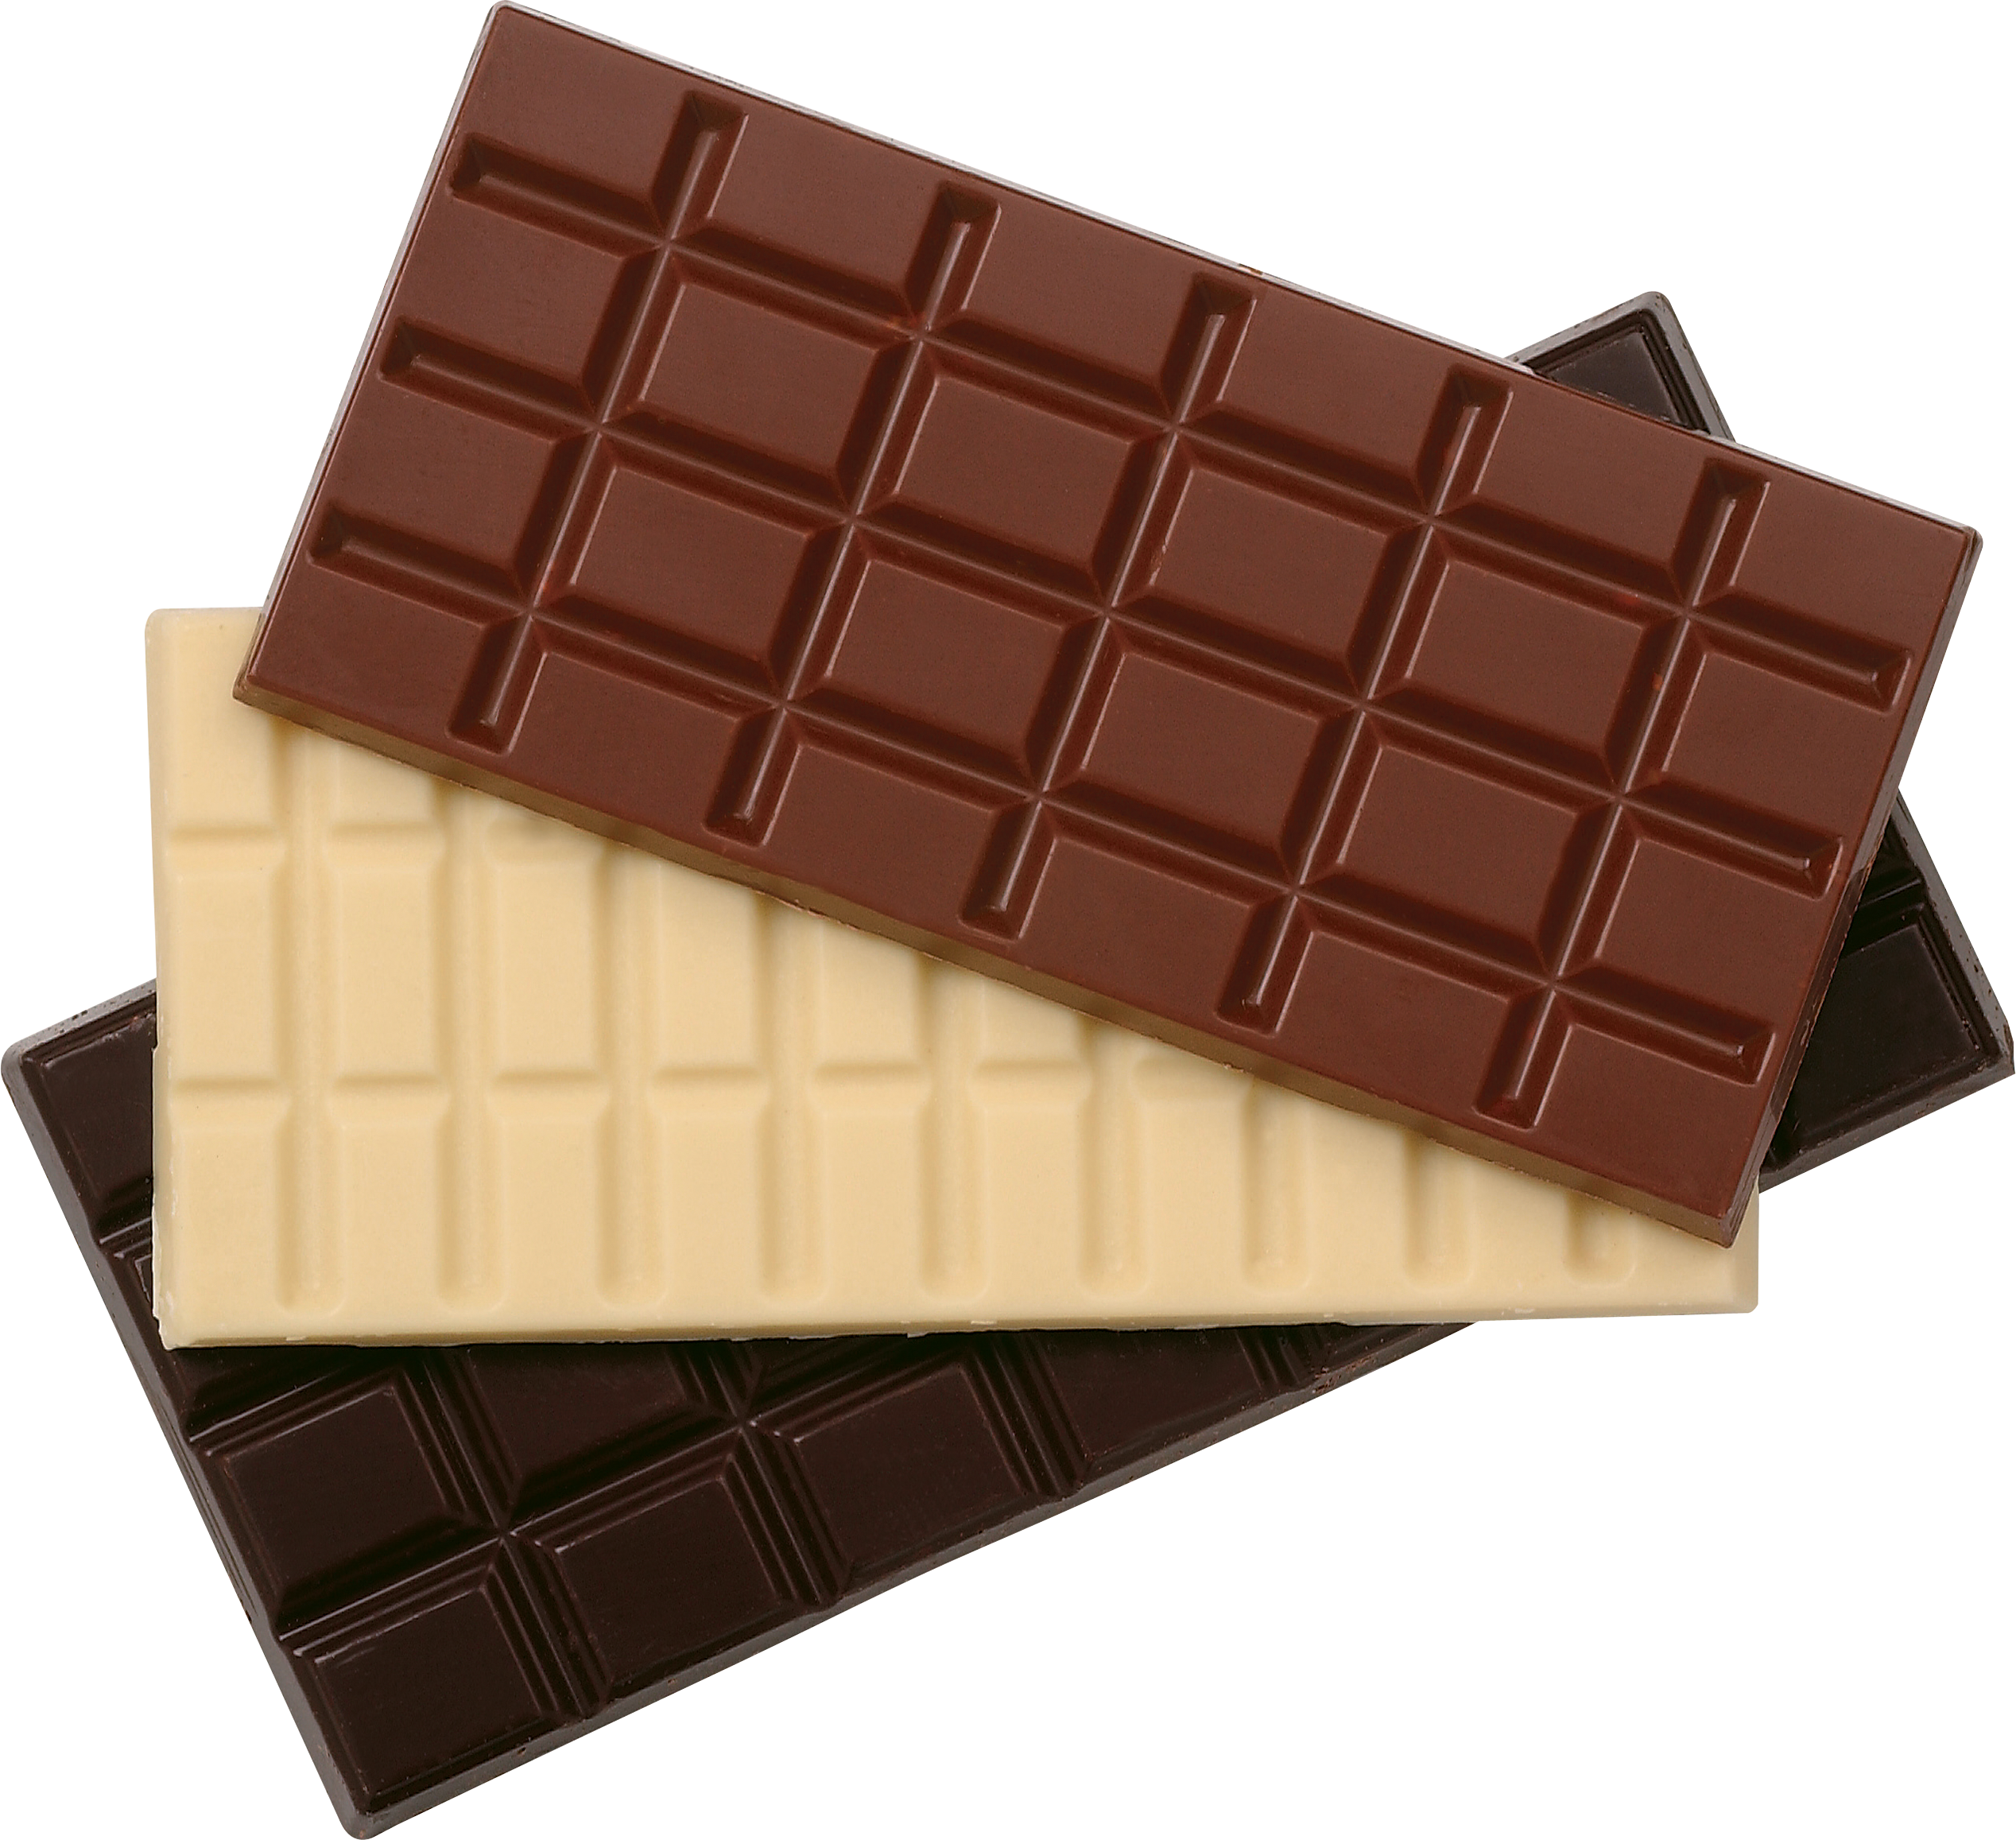 Chocolate Bar PNG Clipart